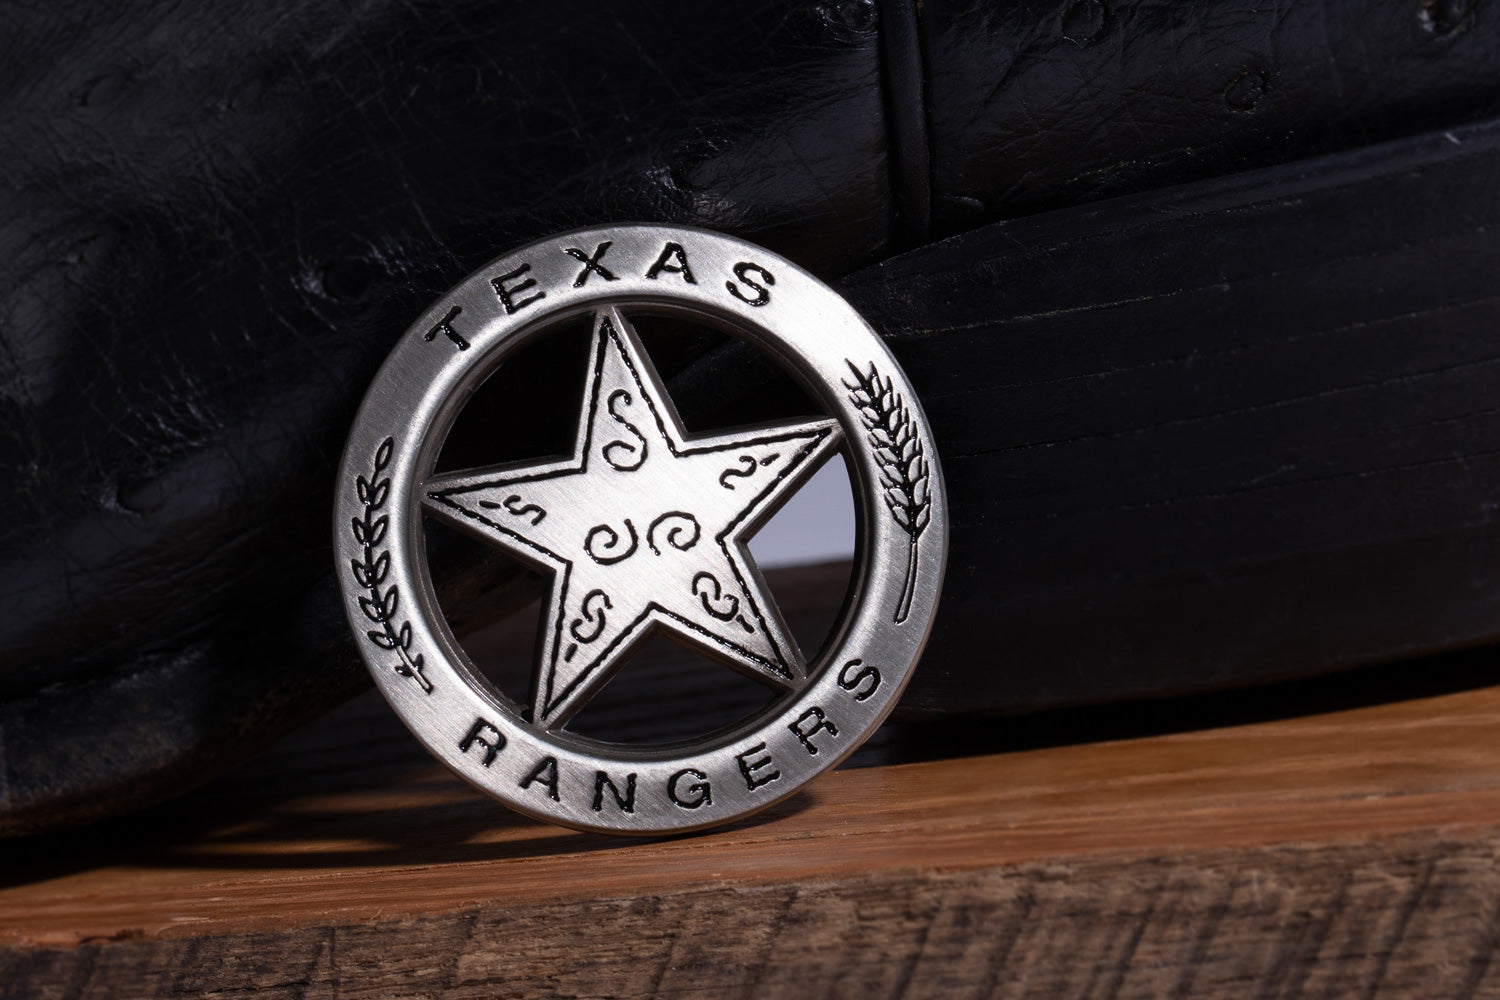 Texas Rangers challenge coin with antique silver finish